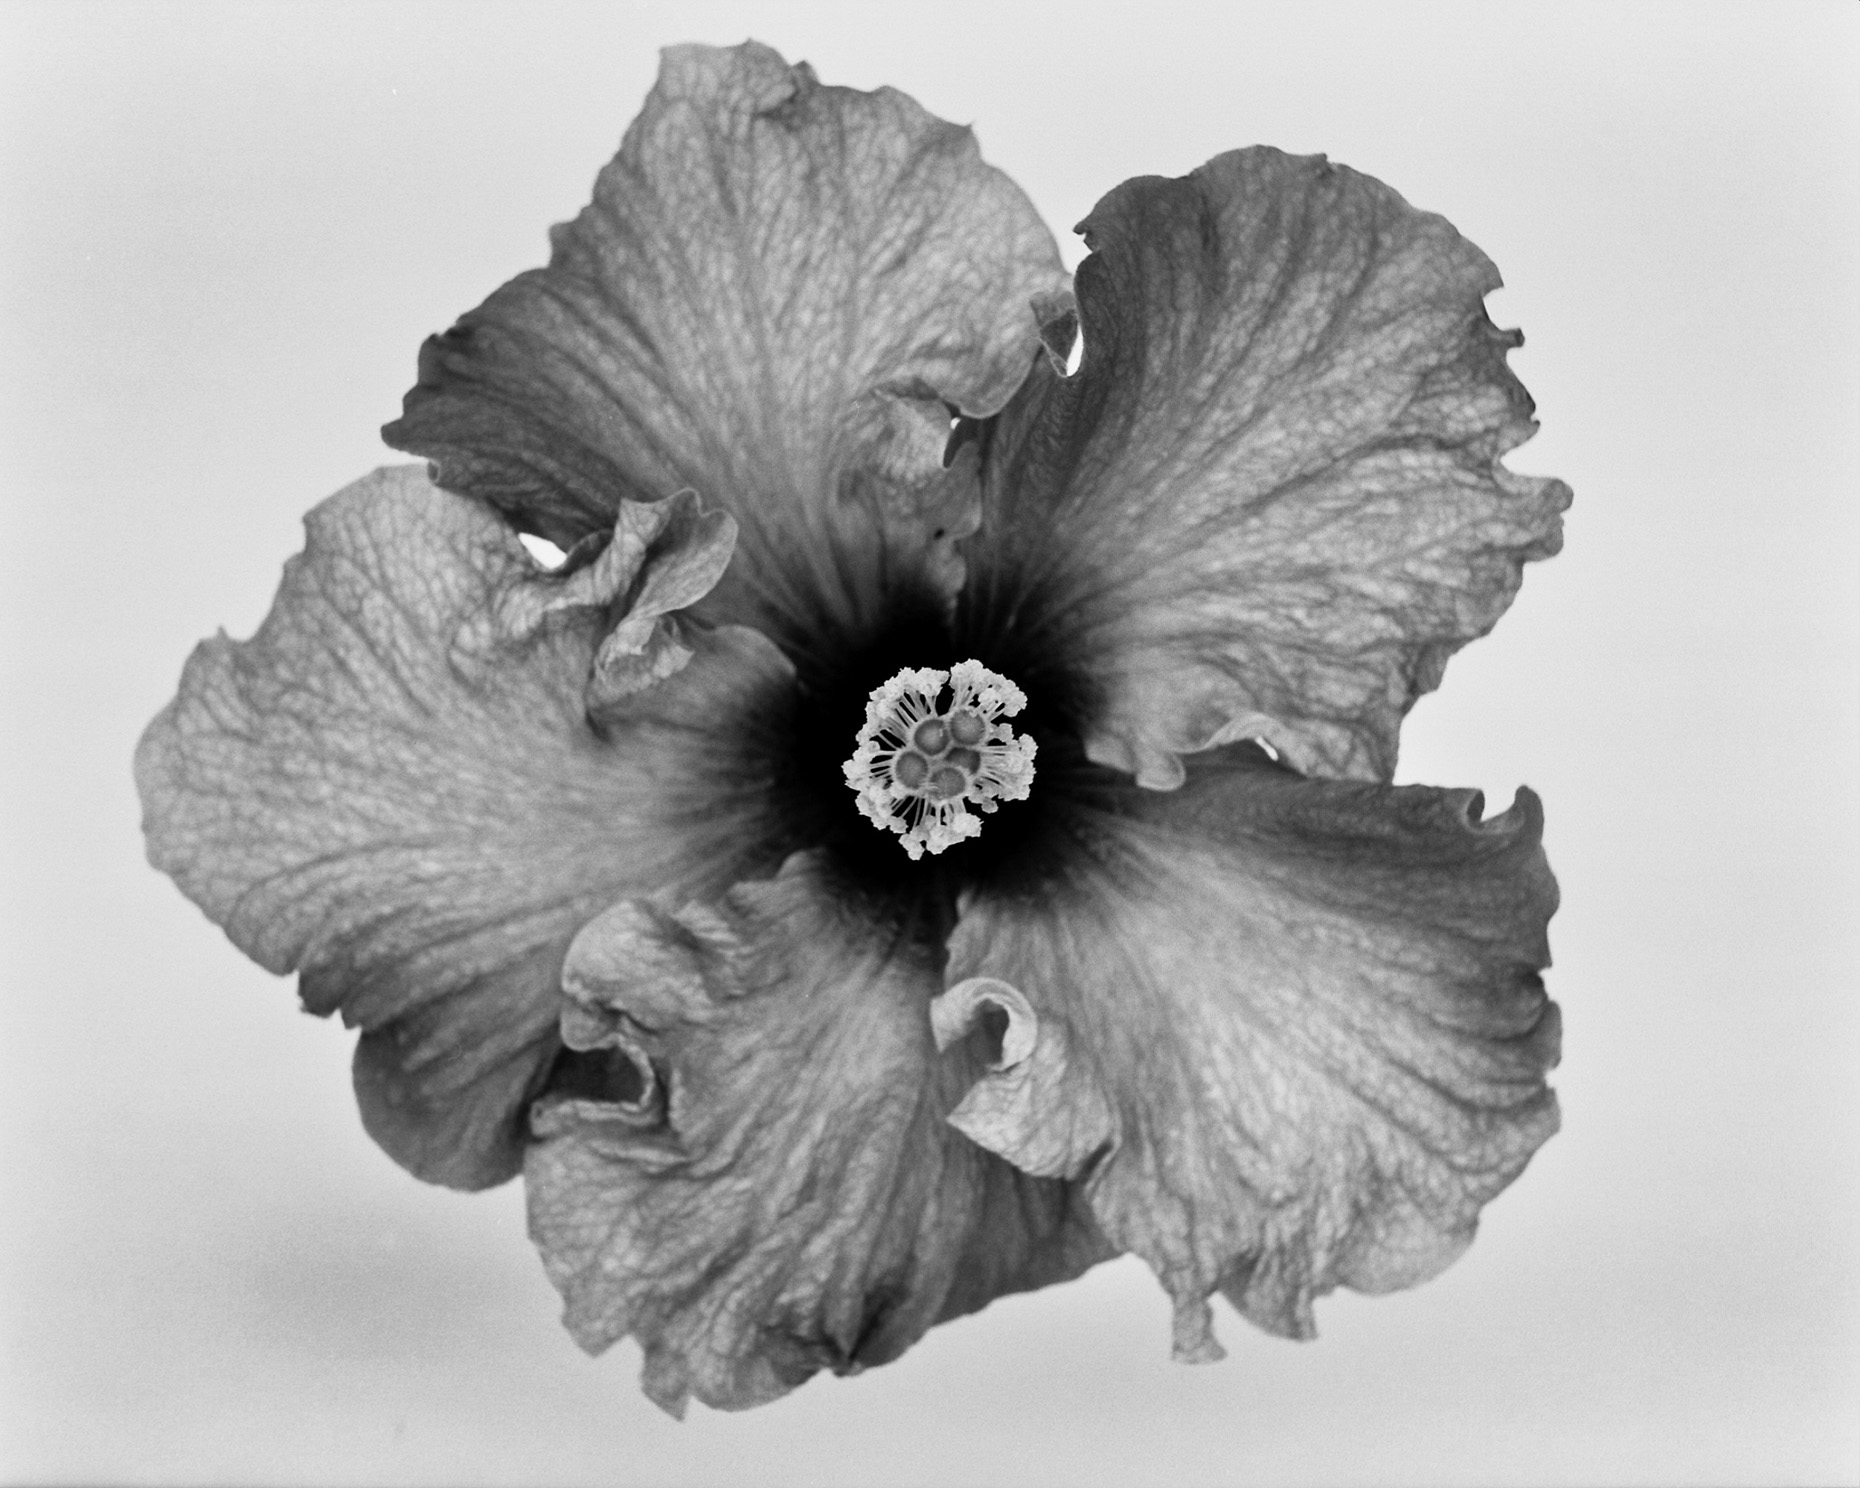 Axel Bernstorff, Collectable limited edition fine art photographic prints. Hibiscus (rosa-sinensis)